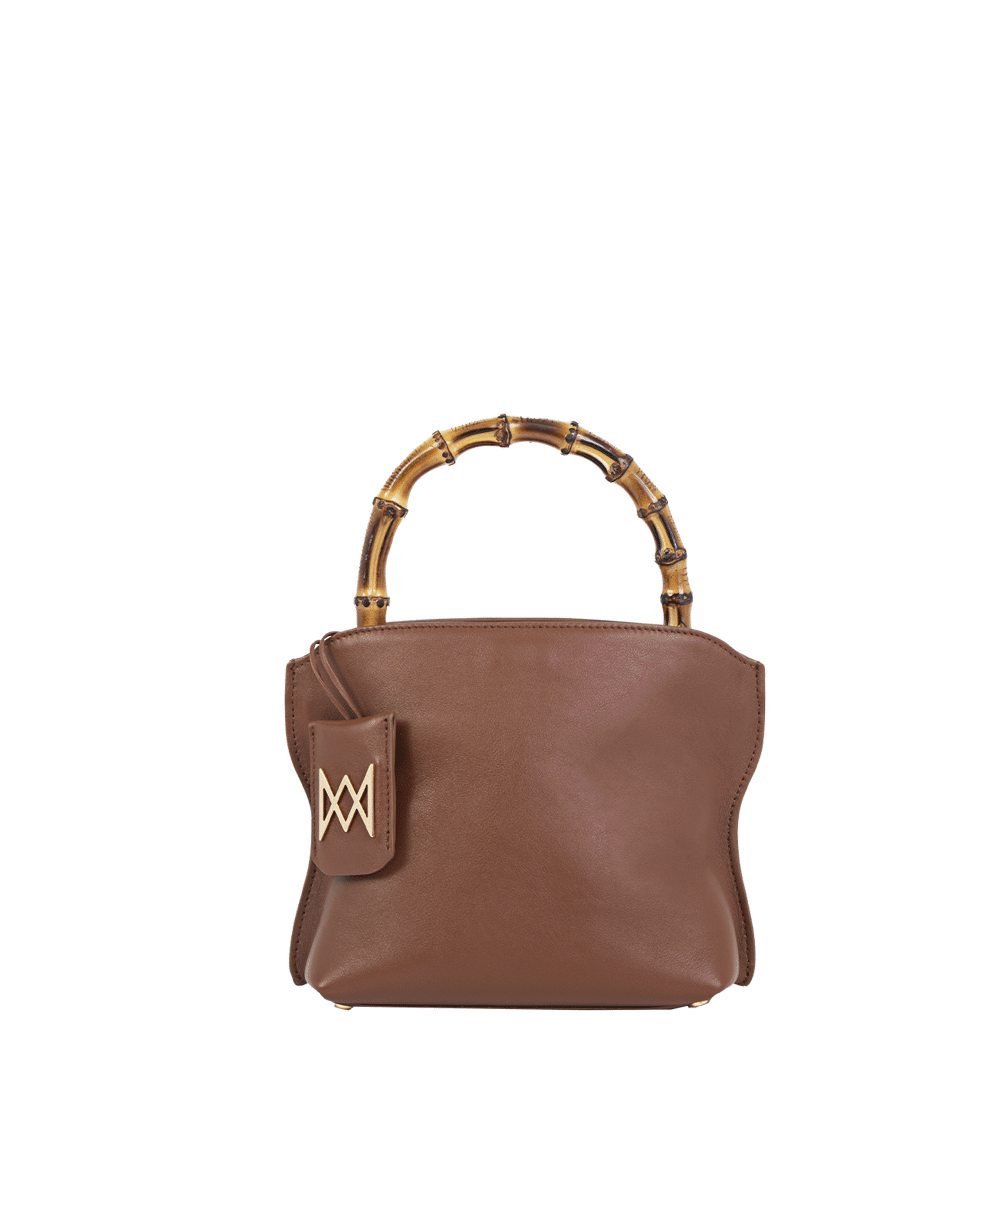 Cross-body bag in calf leather with detachable shoulder strap. Bamboo handles. Made In Italy. Two compartments, zip pocket in the back compartment. Magnetic flap closure with logo. Color: Mocha. Size: Medium 